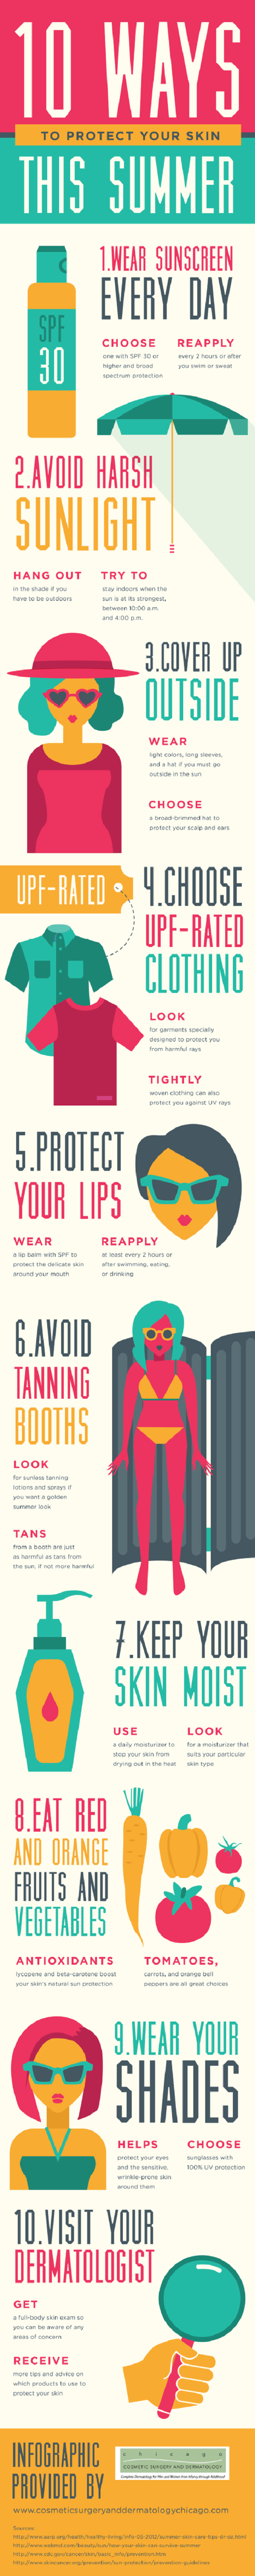 10 Useful Tips For Protecting Your Skin This Summer Infographic